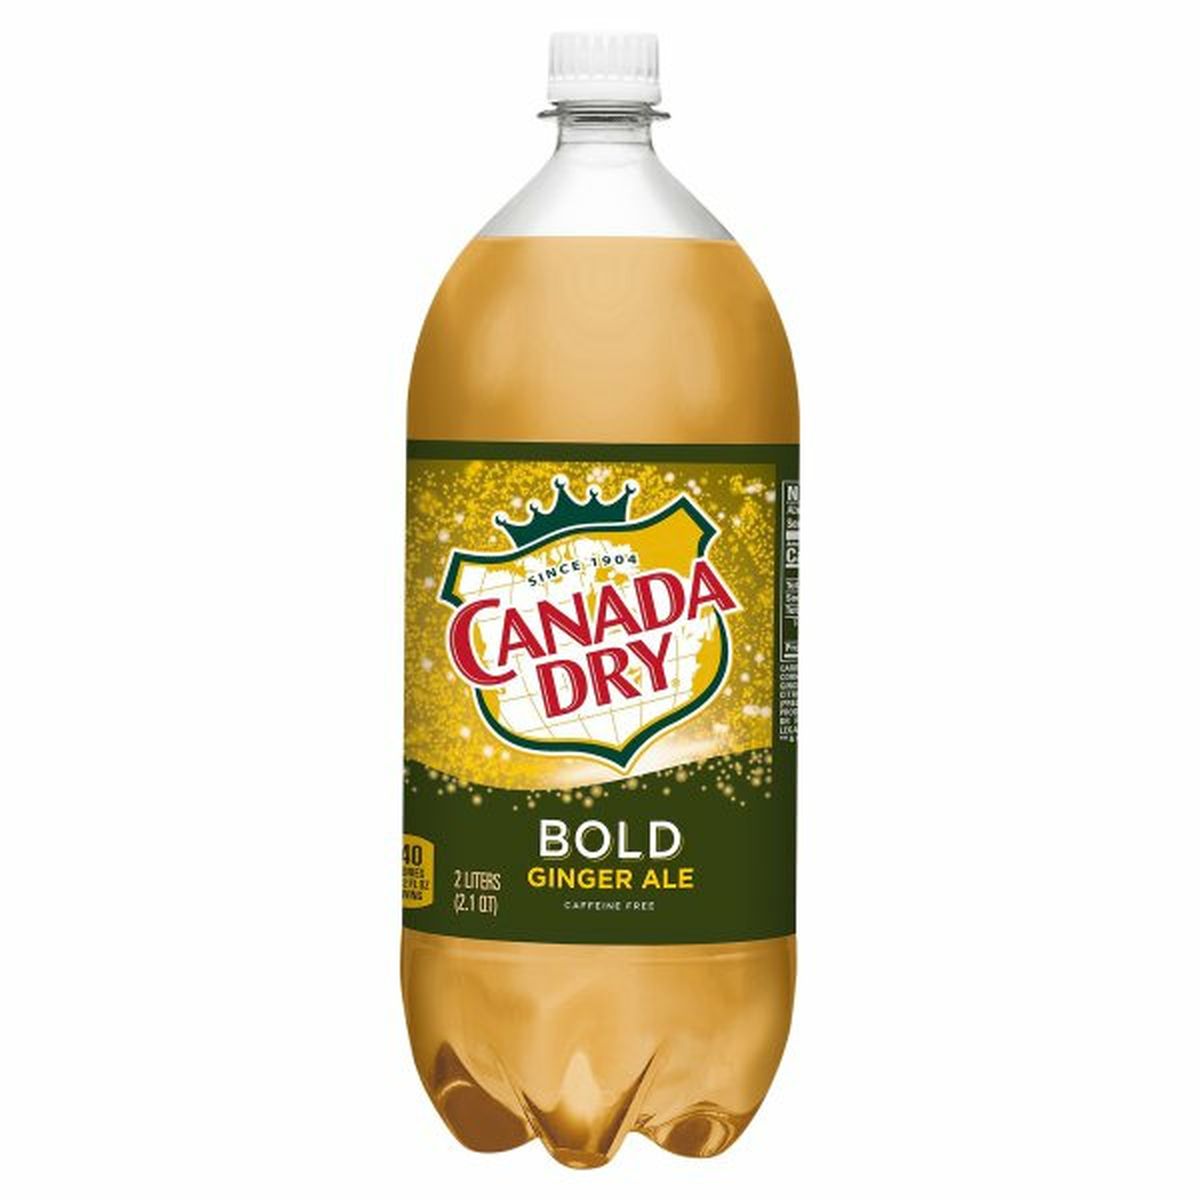 Calories in Canada Dry Ginger Ale, Caffeine Free, Bold